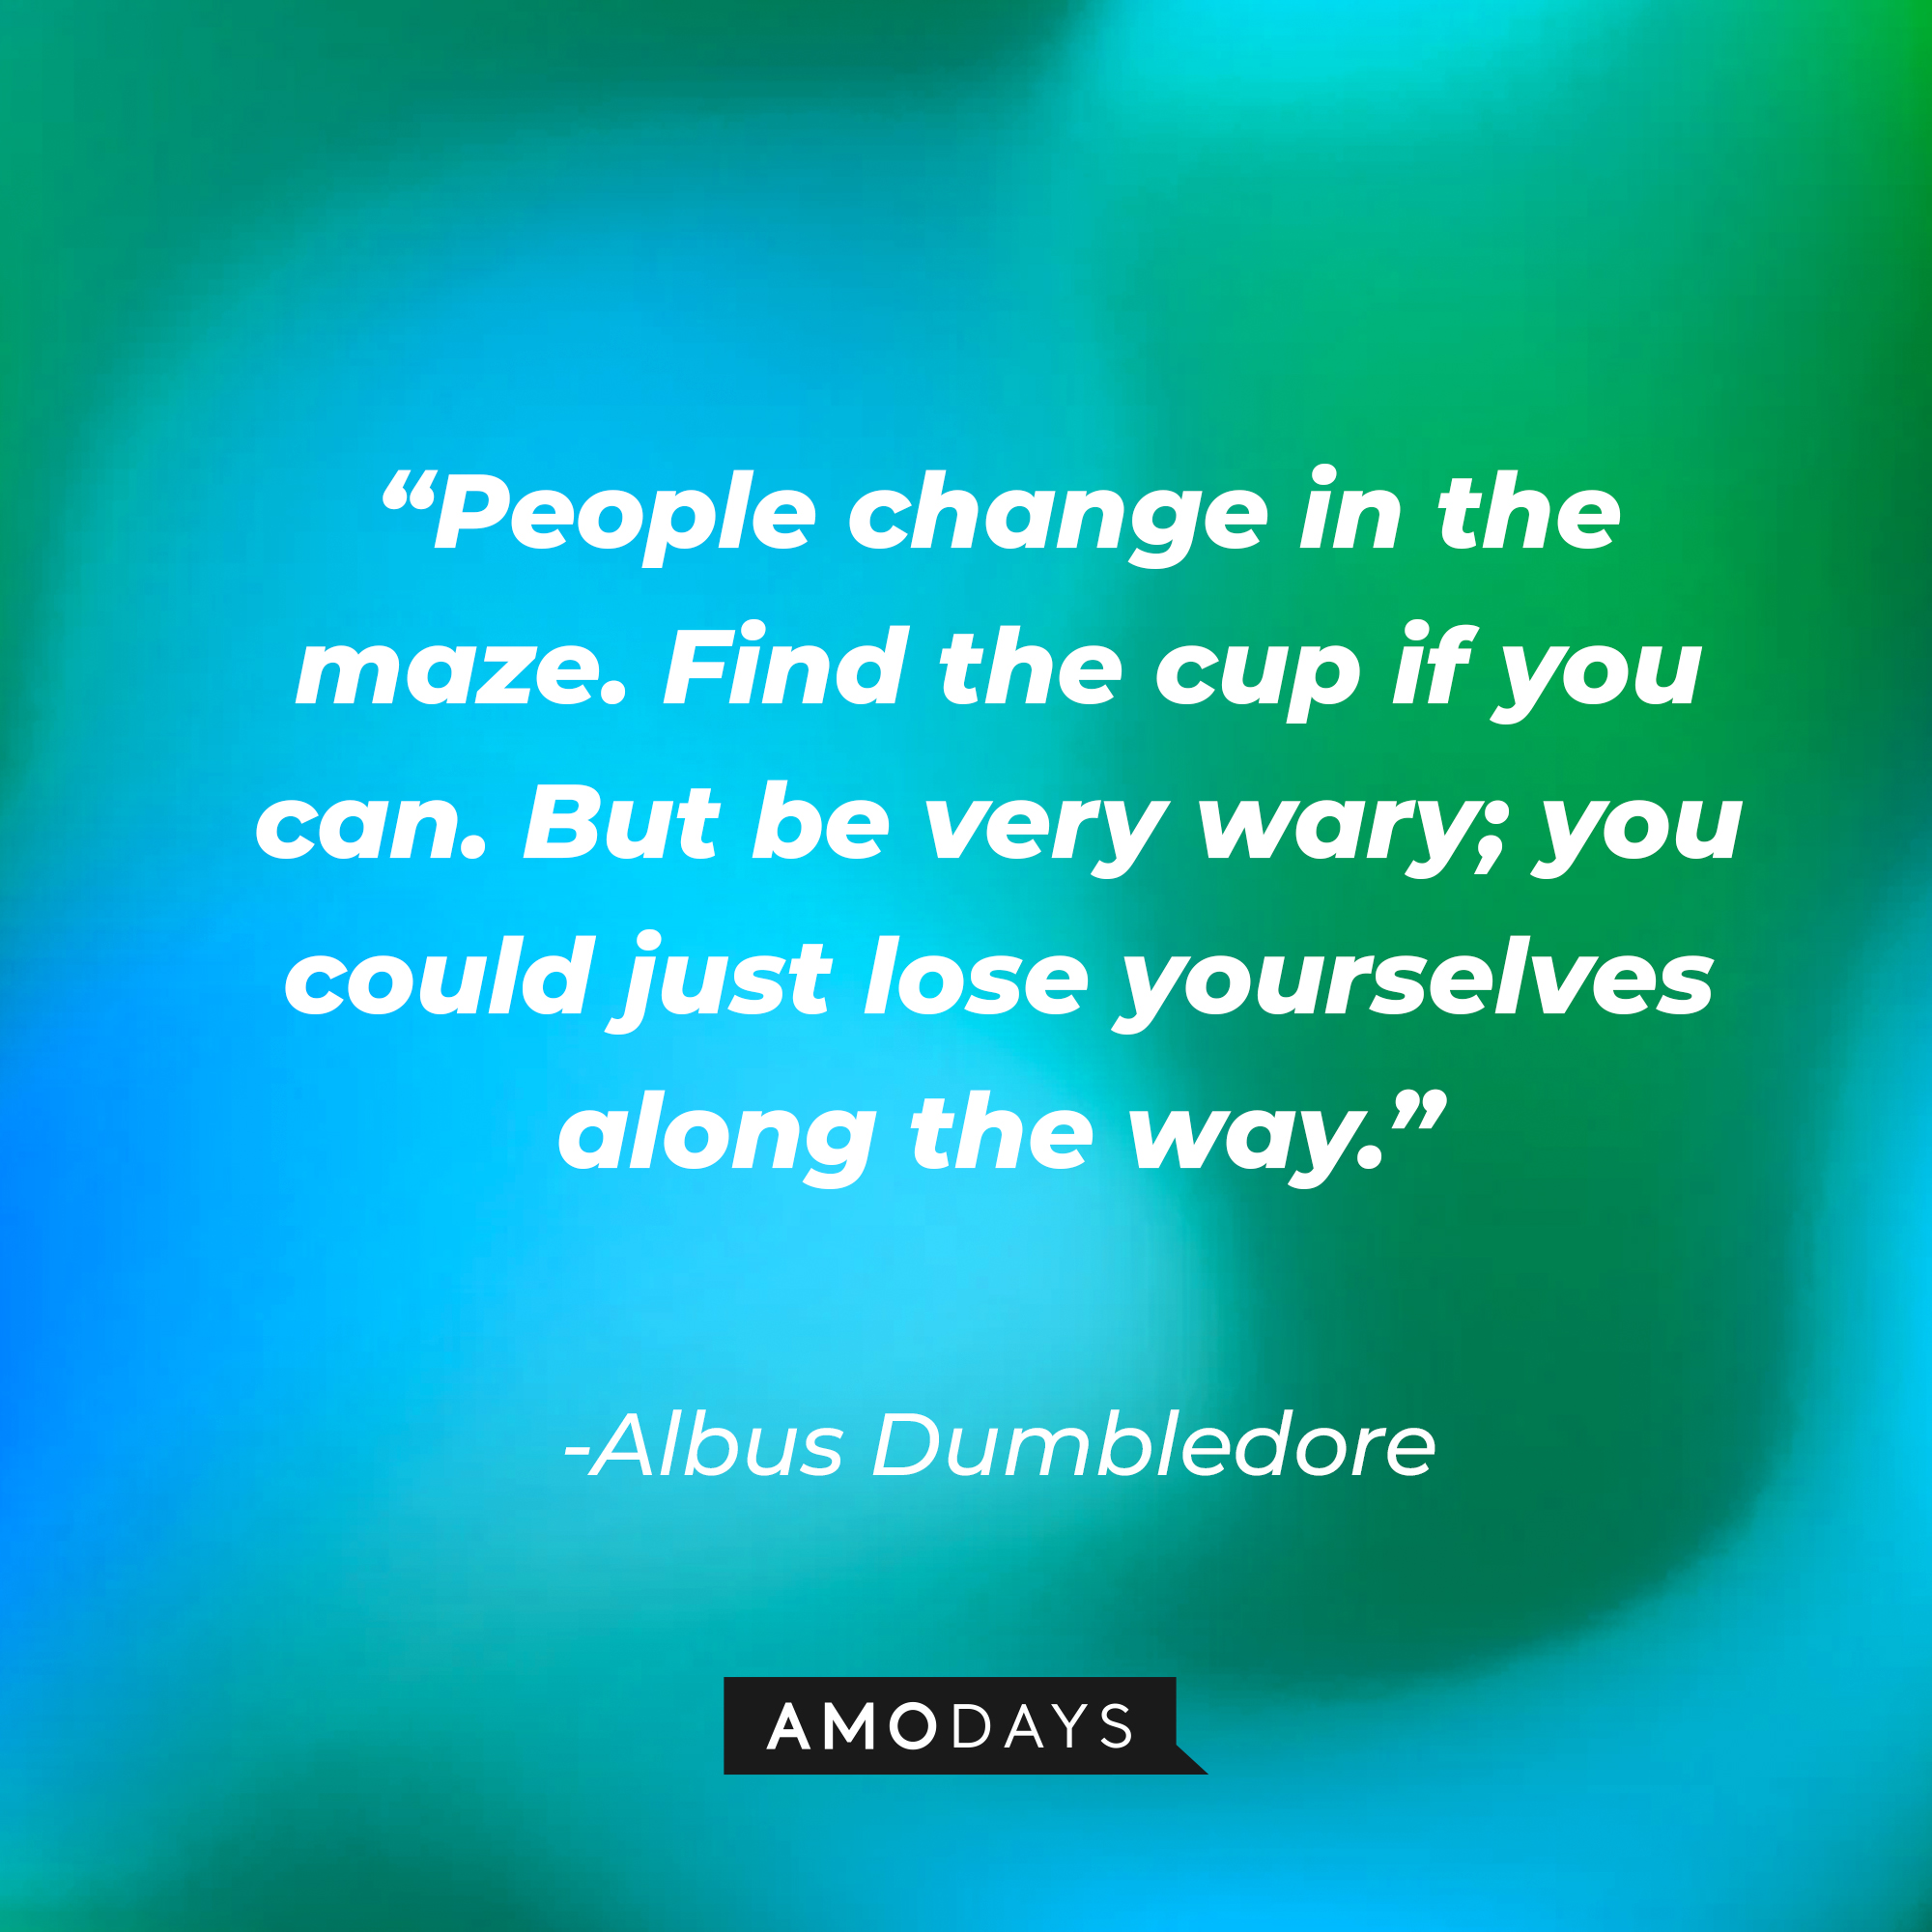 Albus Dumbledore's quote: "People change in the maze. Find the cup if you can. But be very wary; you could just lose yourselves along the way." | Image: Amodays